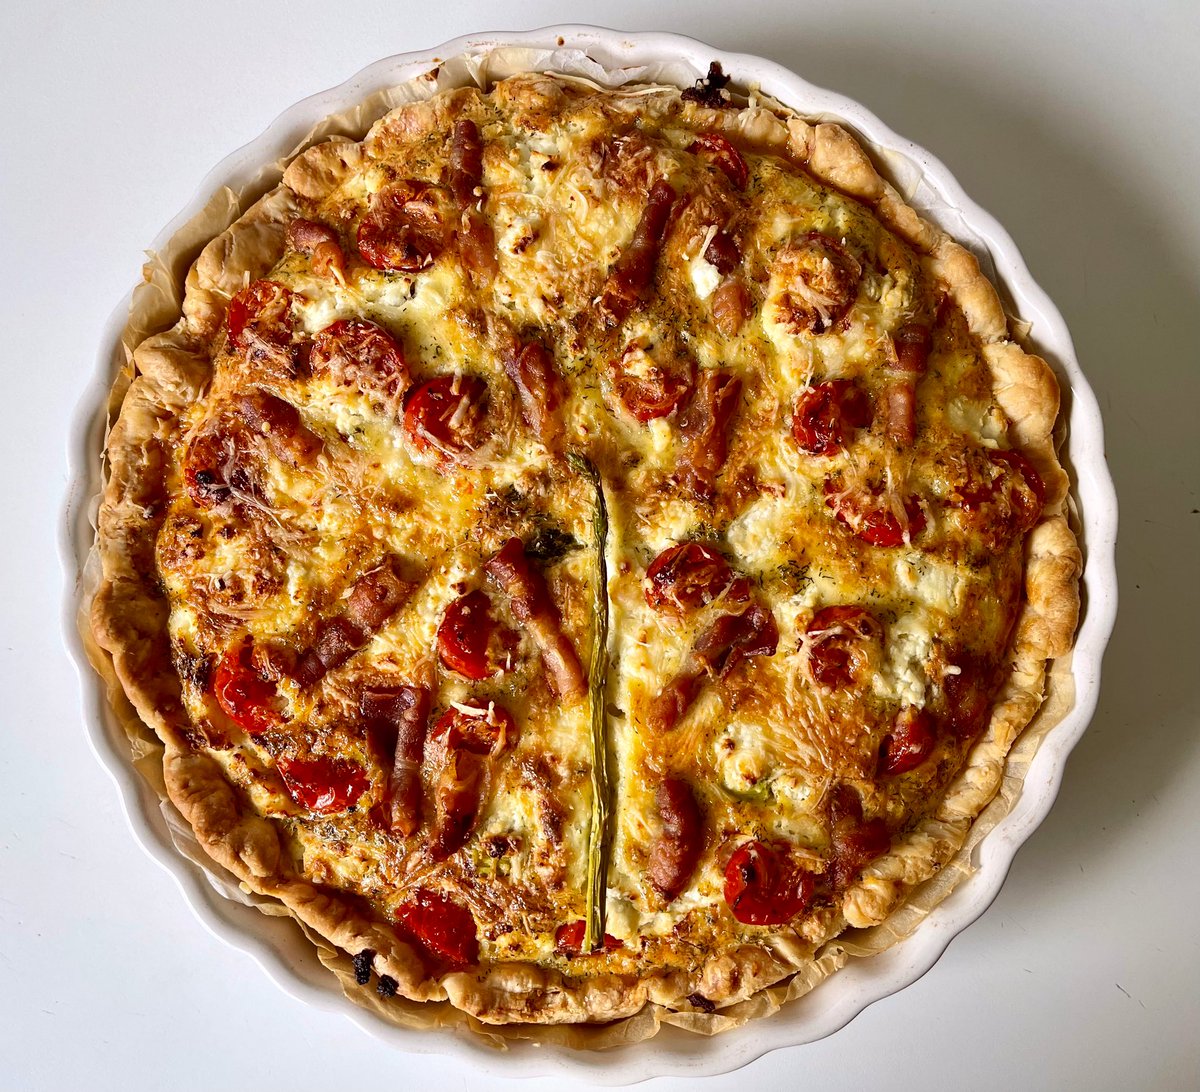 #TuesdayLunch #QuickAndSimple #Quiche #Asparagus #Tomato #Bacon #GoatCheese
Quick & Simple, a tasty quiche w asparagus, tomato, goat cheese & leftover bacon + 1 gl. of Portuguese Albarinho by Lapa.
Other news:
Car checked by control agency and OK again for 1 yr!
Enjoy your day!